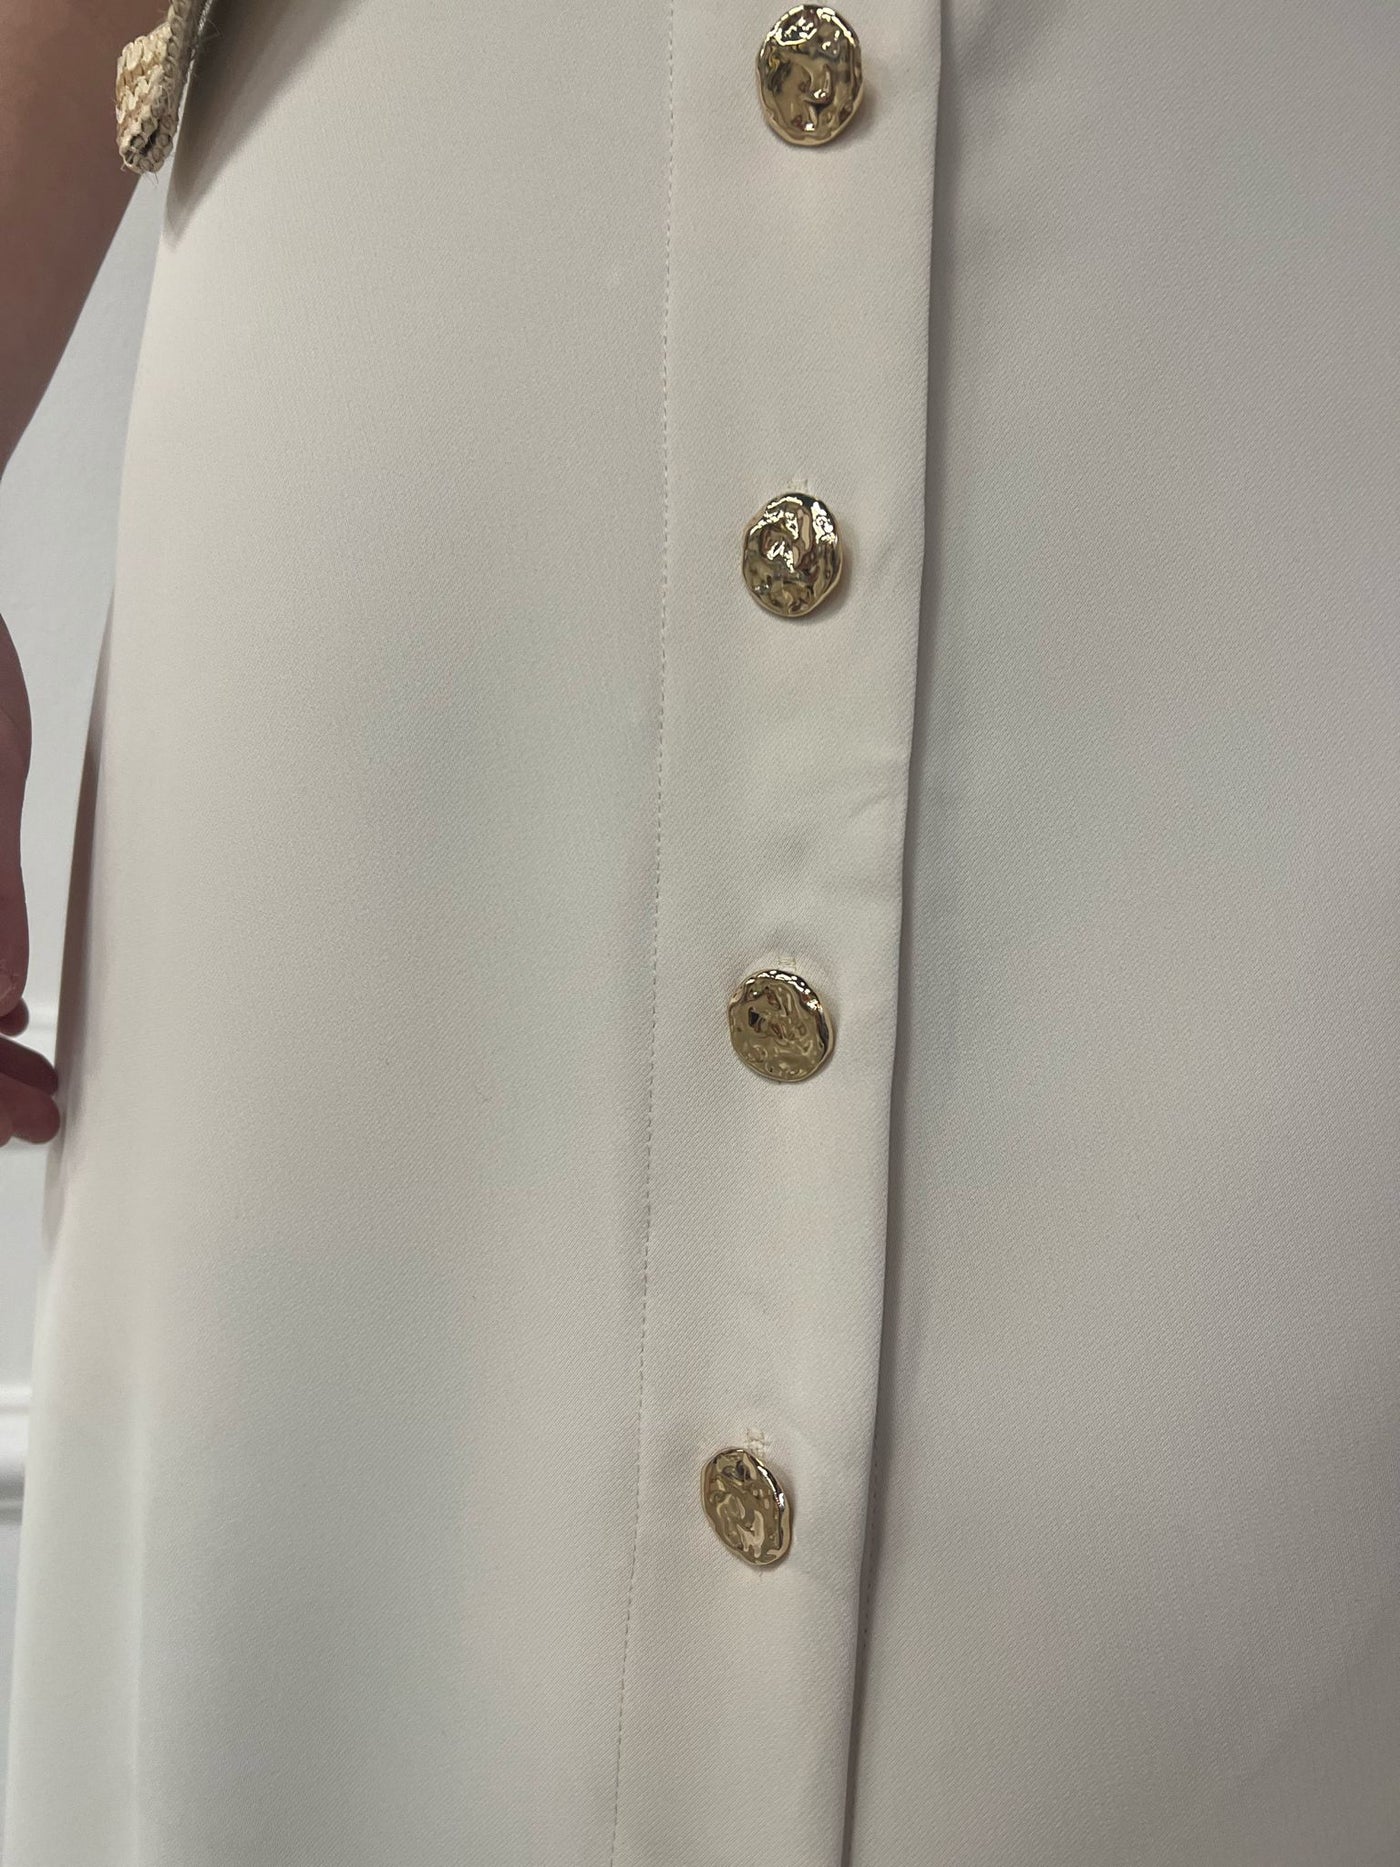 Skirt gold buttons 4345 Off-white